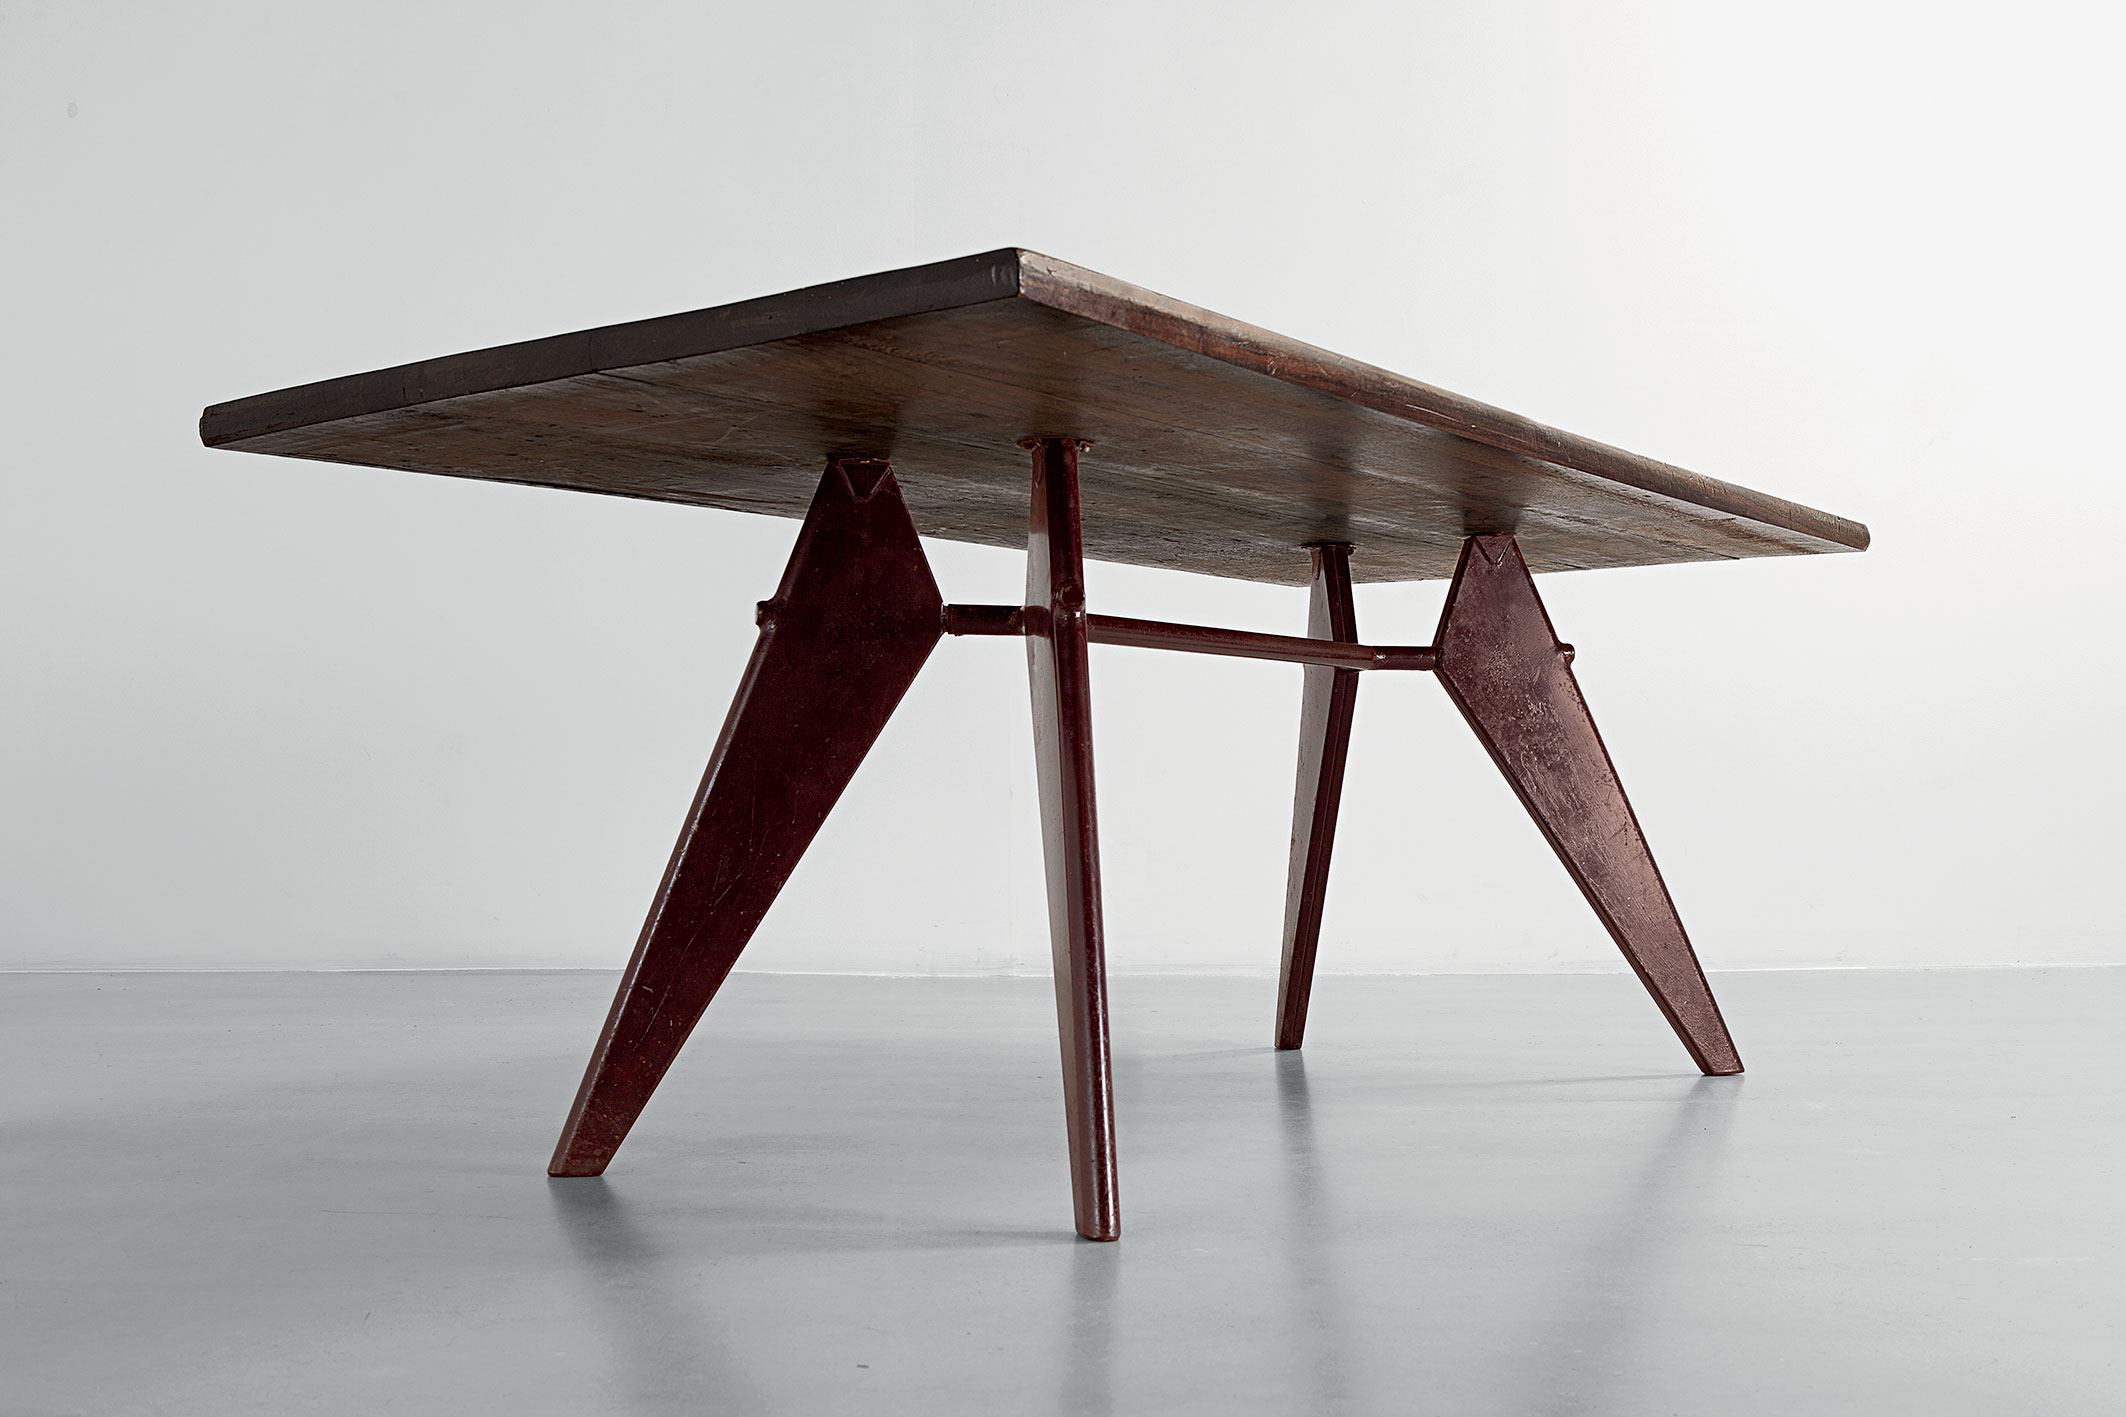 S.A.M. no. 506 table. Adapted by Charlotte Perriand for the Air France building, Brazzaville, 1952. African solid wood (kambala) table-top fixed on demountable sheet steel legs.